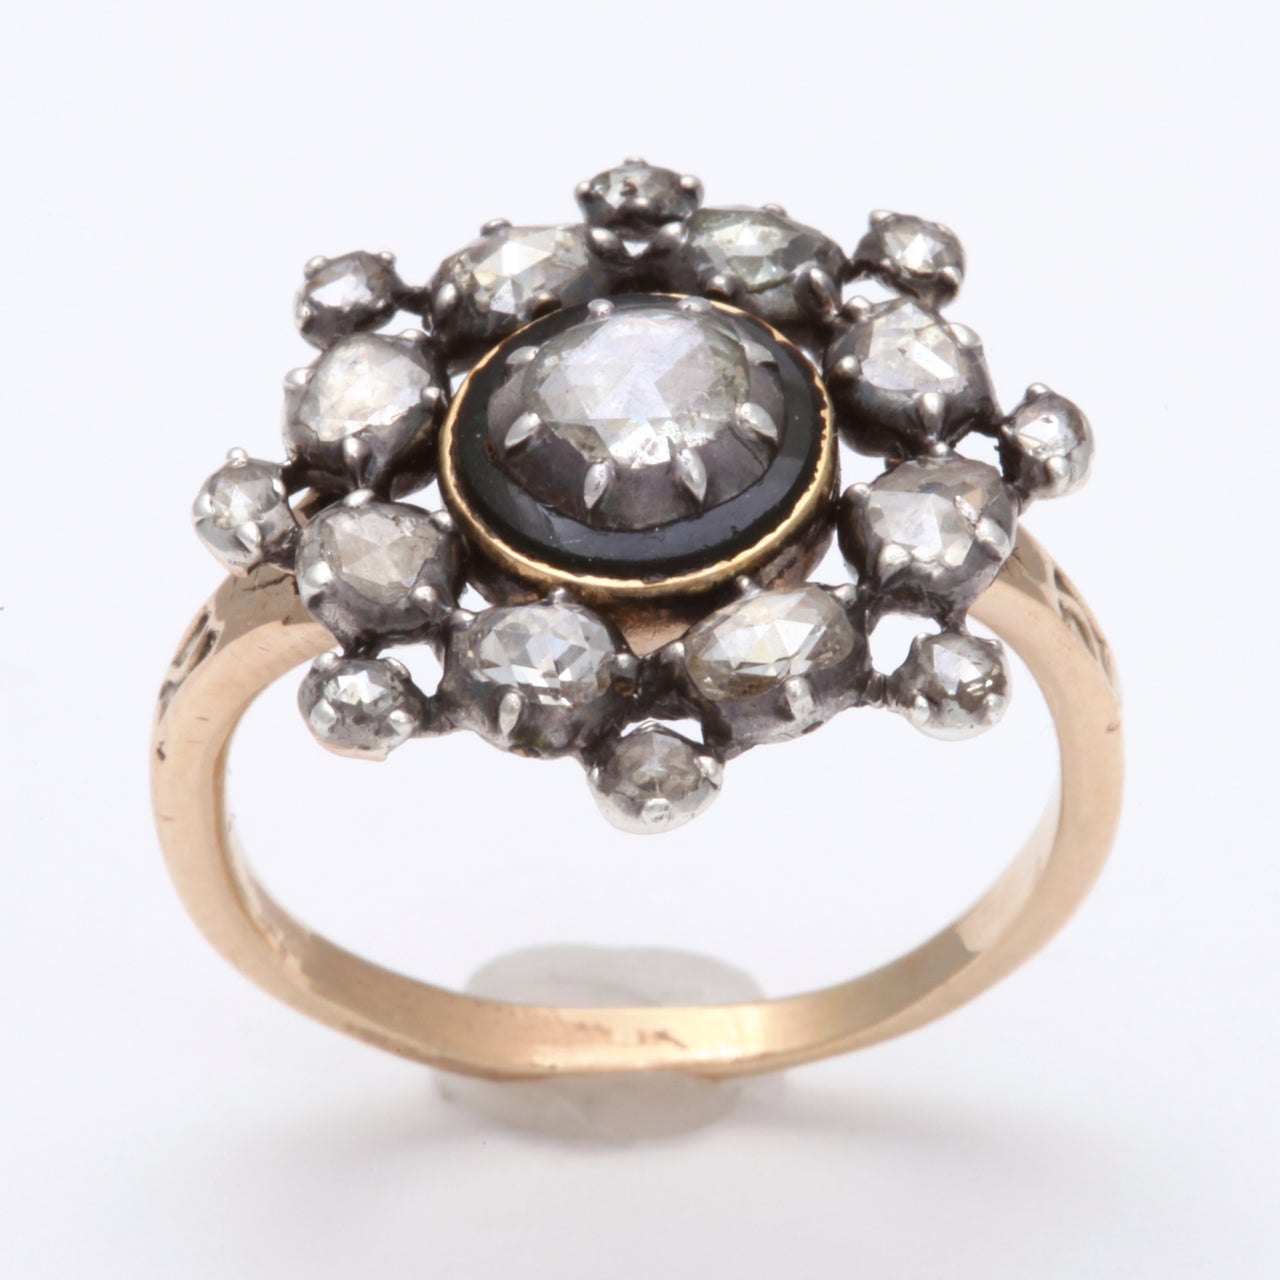 Sixteen antique cut diamonds form an irregular and graceful wreath that surrounds a one carat rose cut gem in this handmade Georgian Ring. The settings are silver rubbed over rounds with prongs. The central diamond shines  light from a gold frame